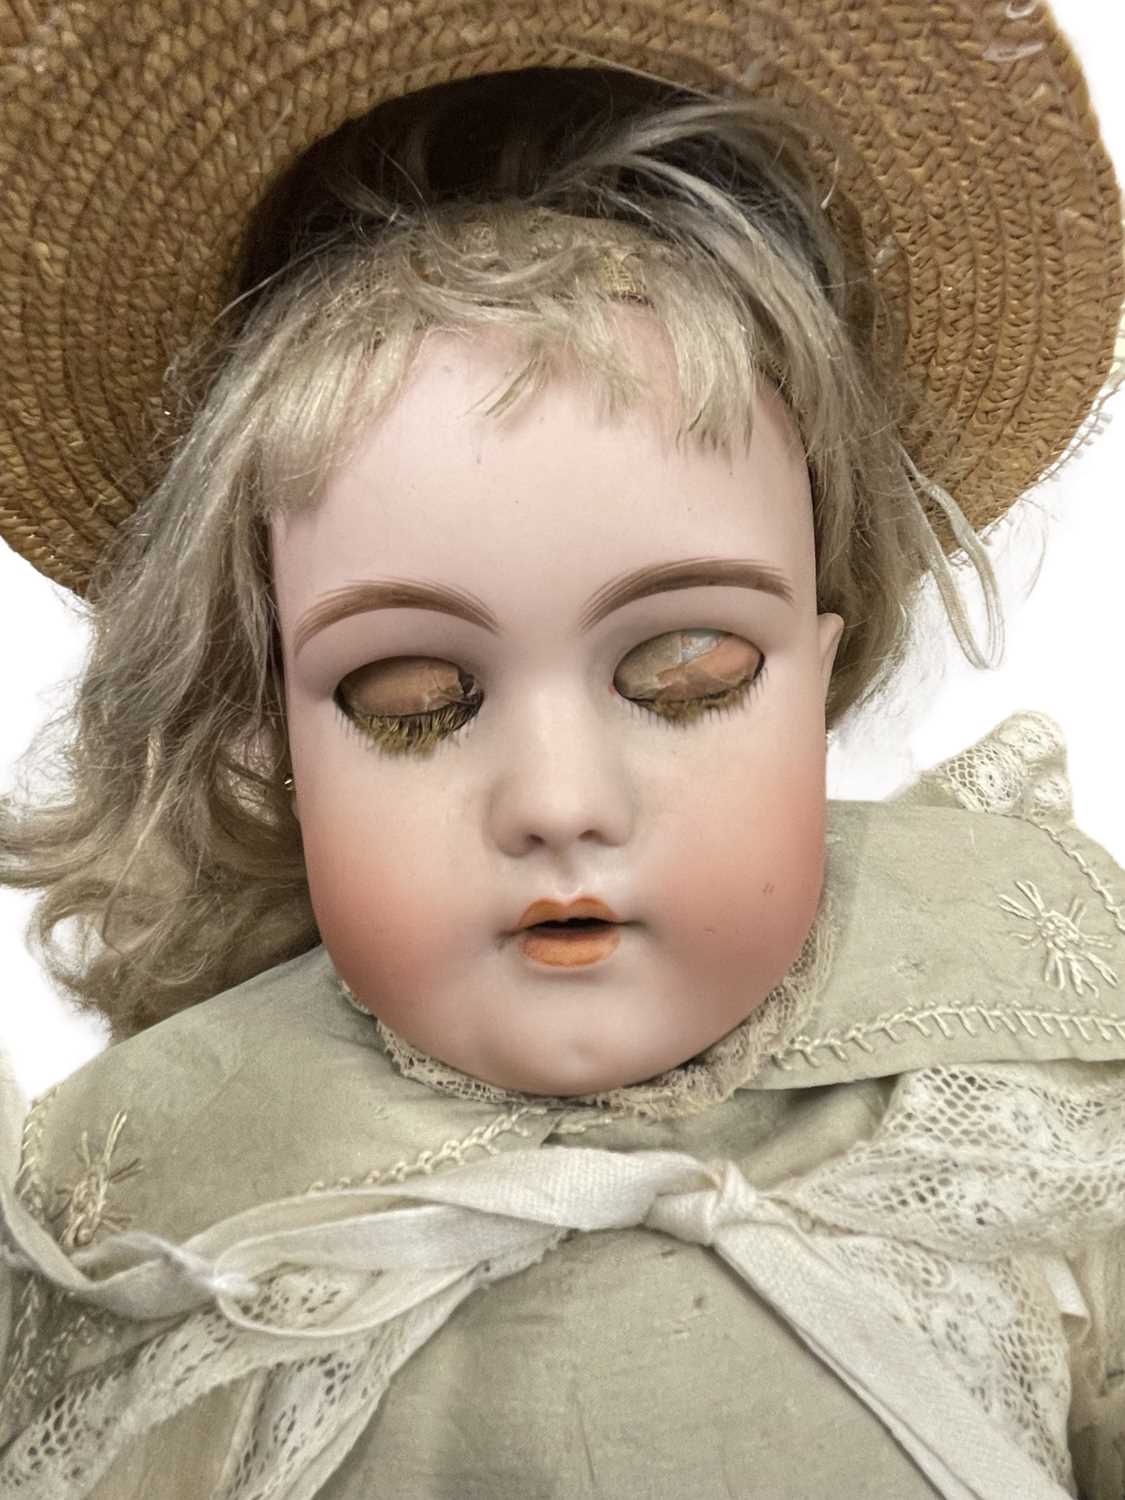 A Simon and Halbig bisque head doll, with blue eyes and teeth showing. Pierced ears with later - Bild 4 aus 6